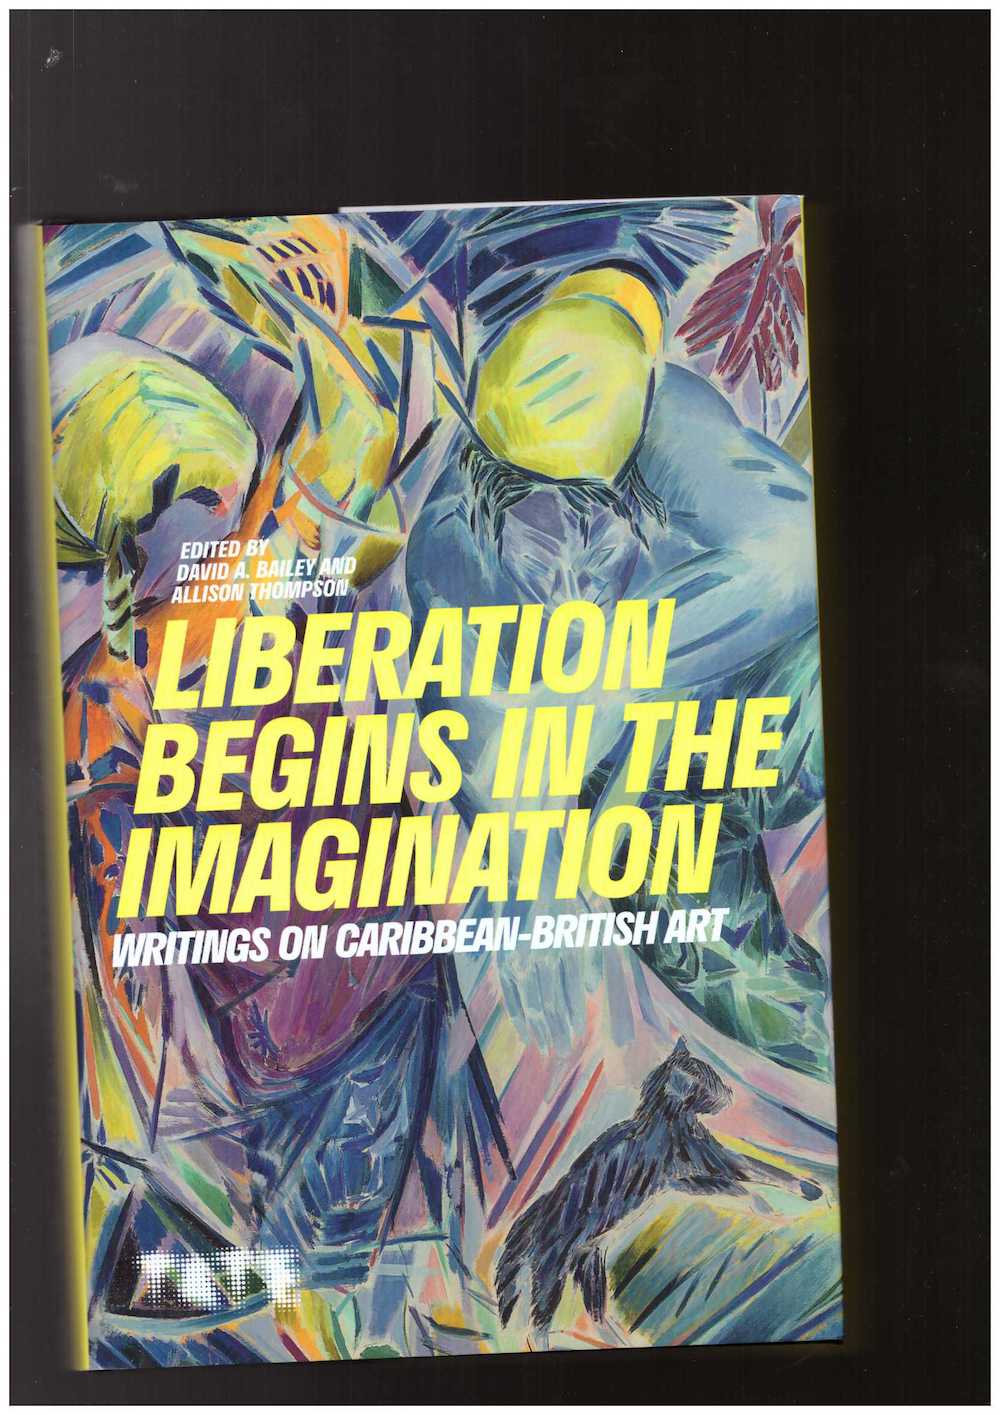 BAILEY, David A.; THOMPSON, Allison (eds.) - Liberation Begins in the Imagination: Writings on Caribbean-British Art